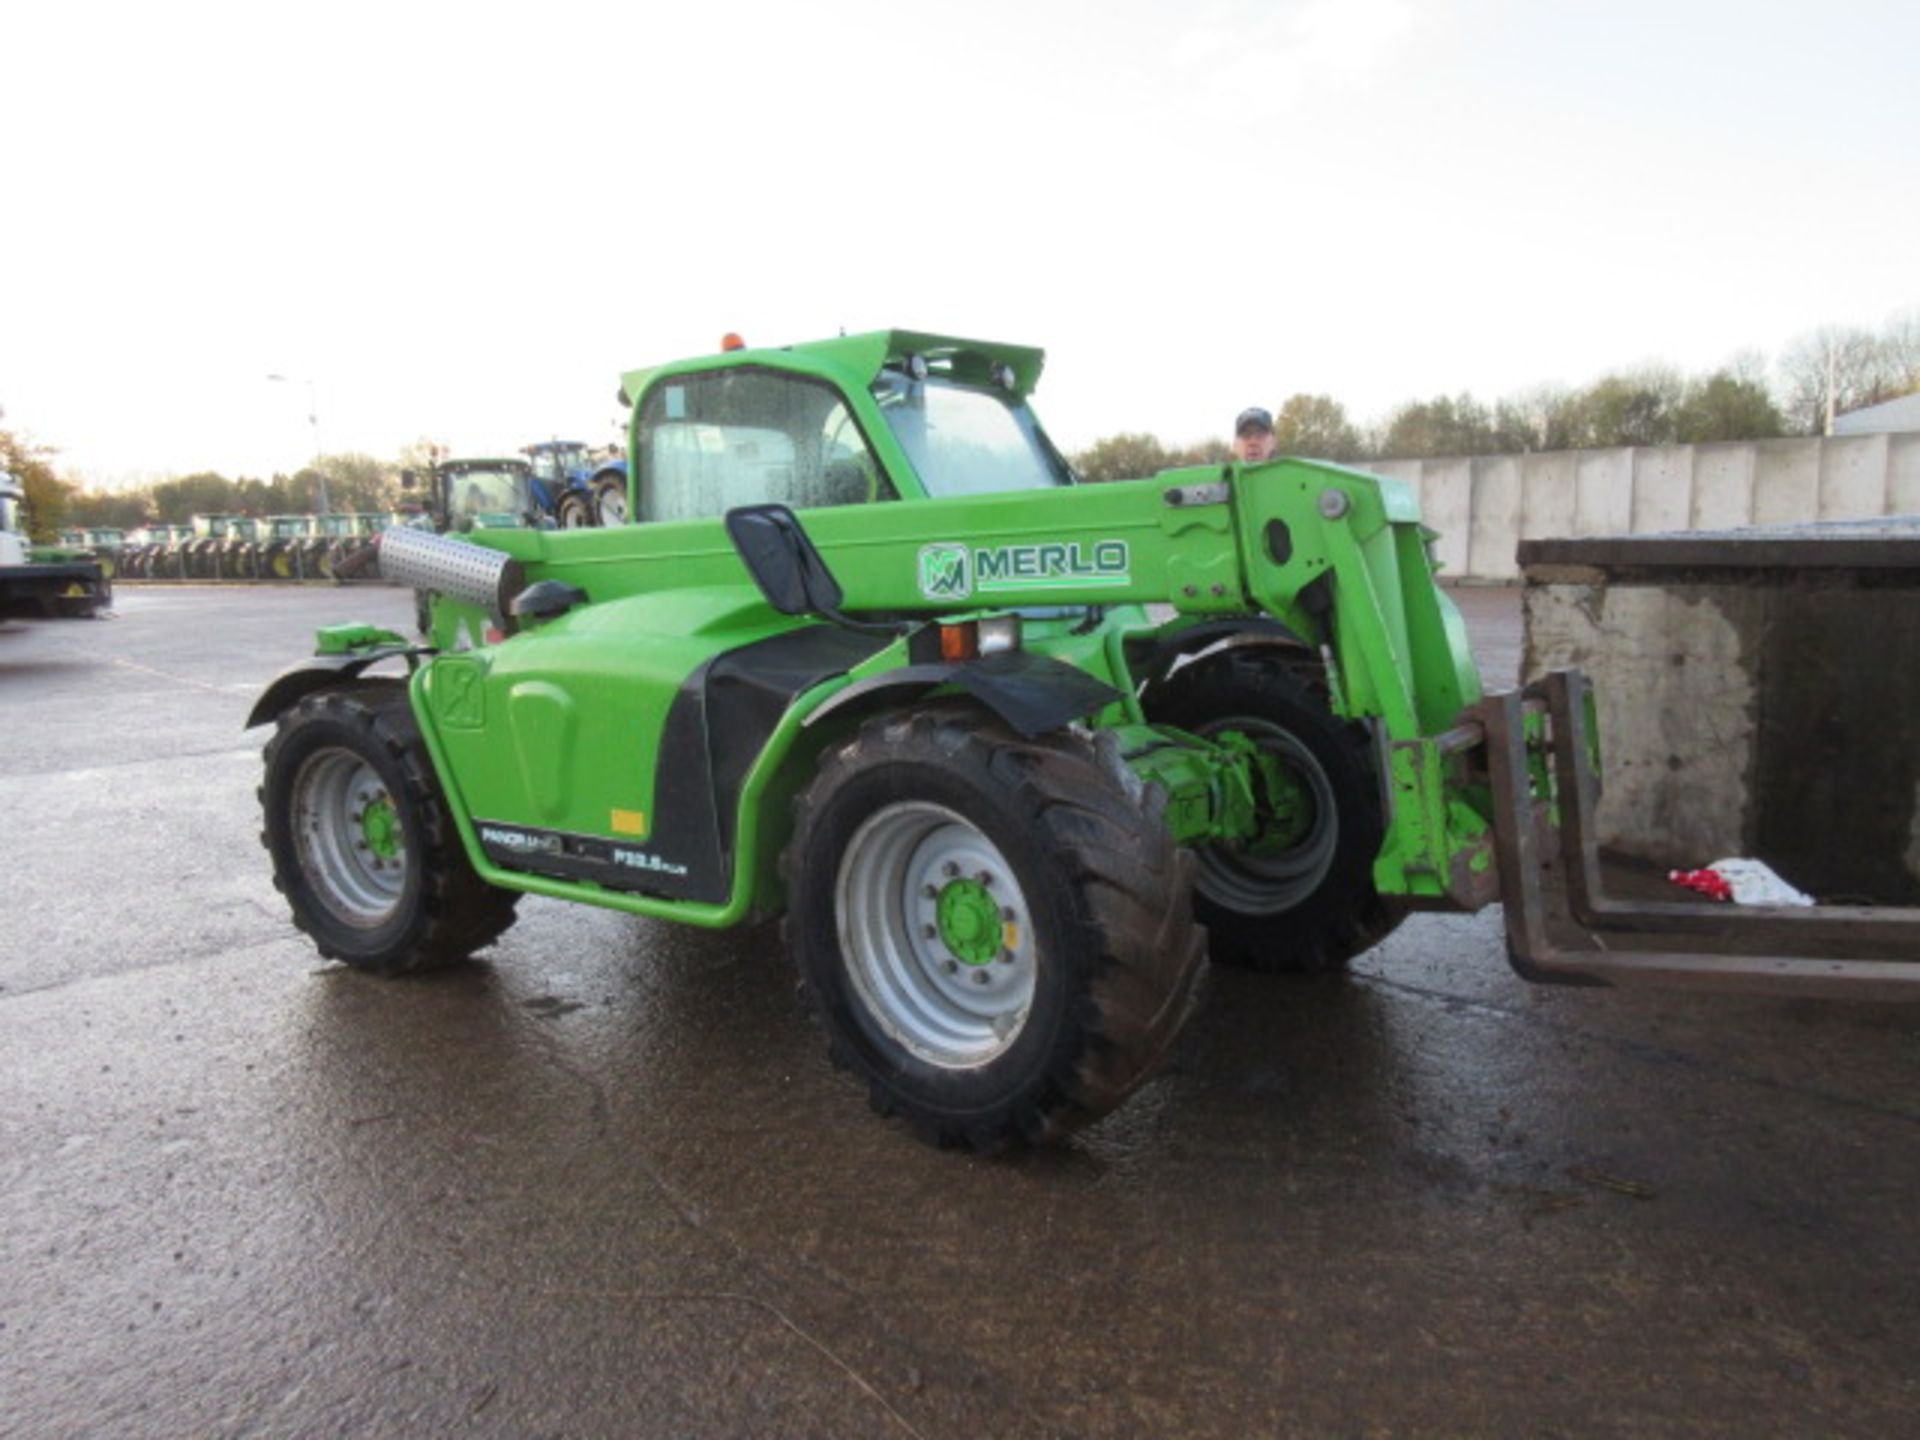 2010 Merlo Panoramic P32.6 Plus Telehandler. Pallet Forks & Pick Up Hitch. 7400 hrs - Image 5 of 11